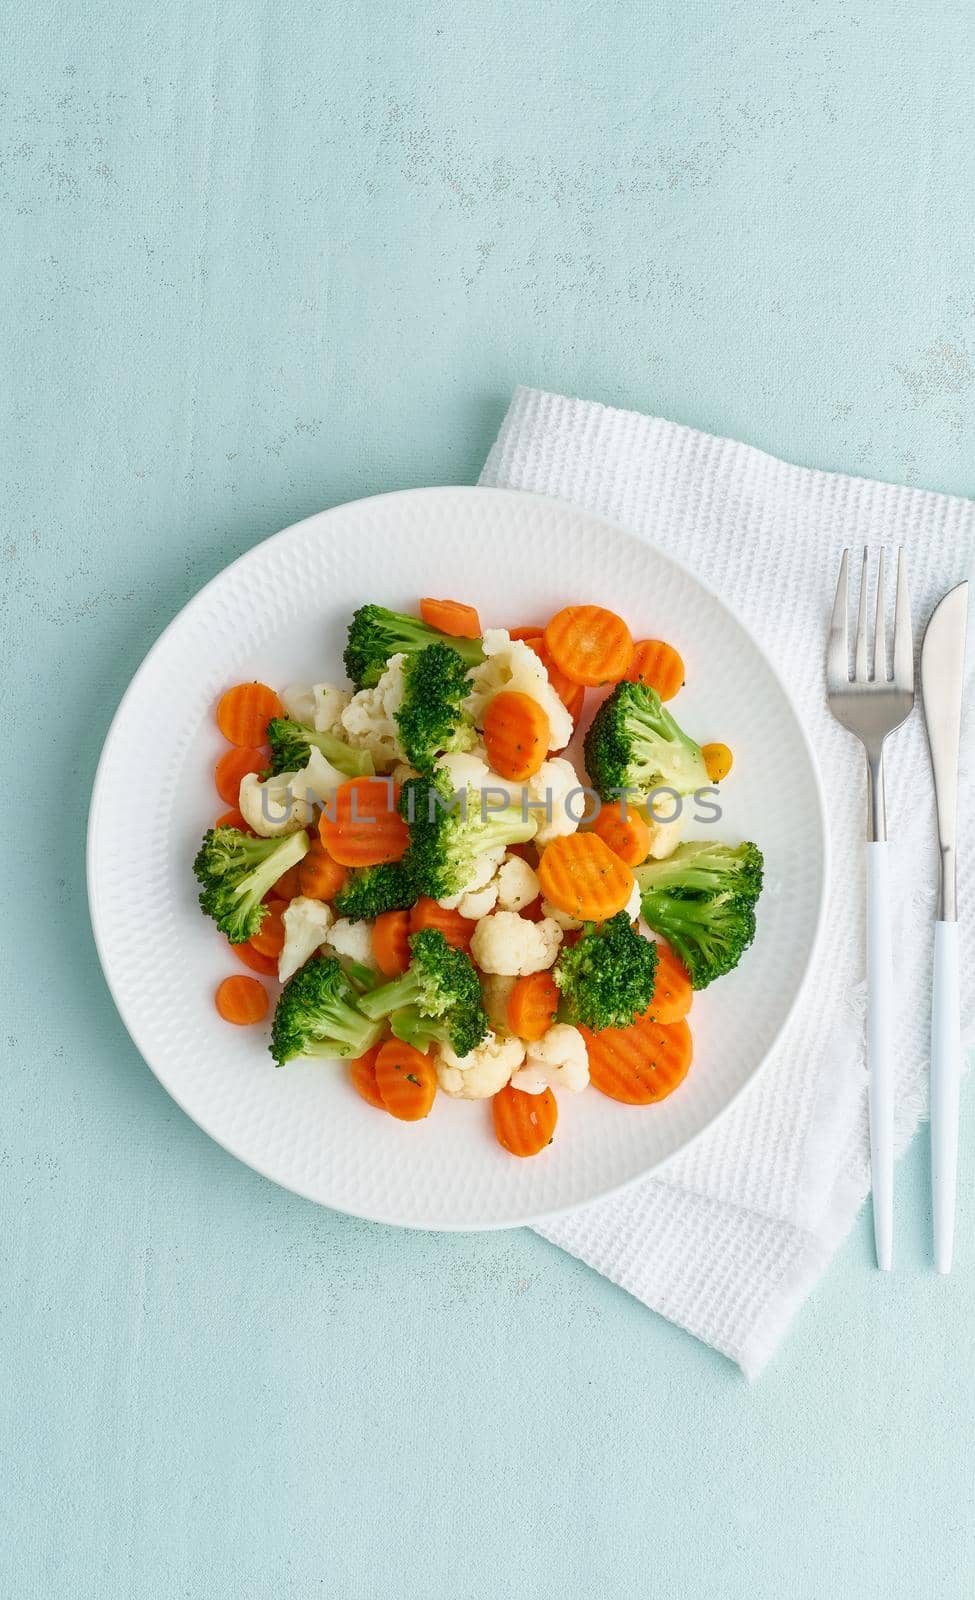 Mix of boiled vegetables. Broccoli, carrots, cauliflower. Steamed vegetables for dietary by NataBene